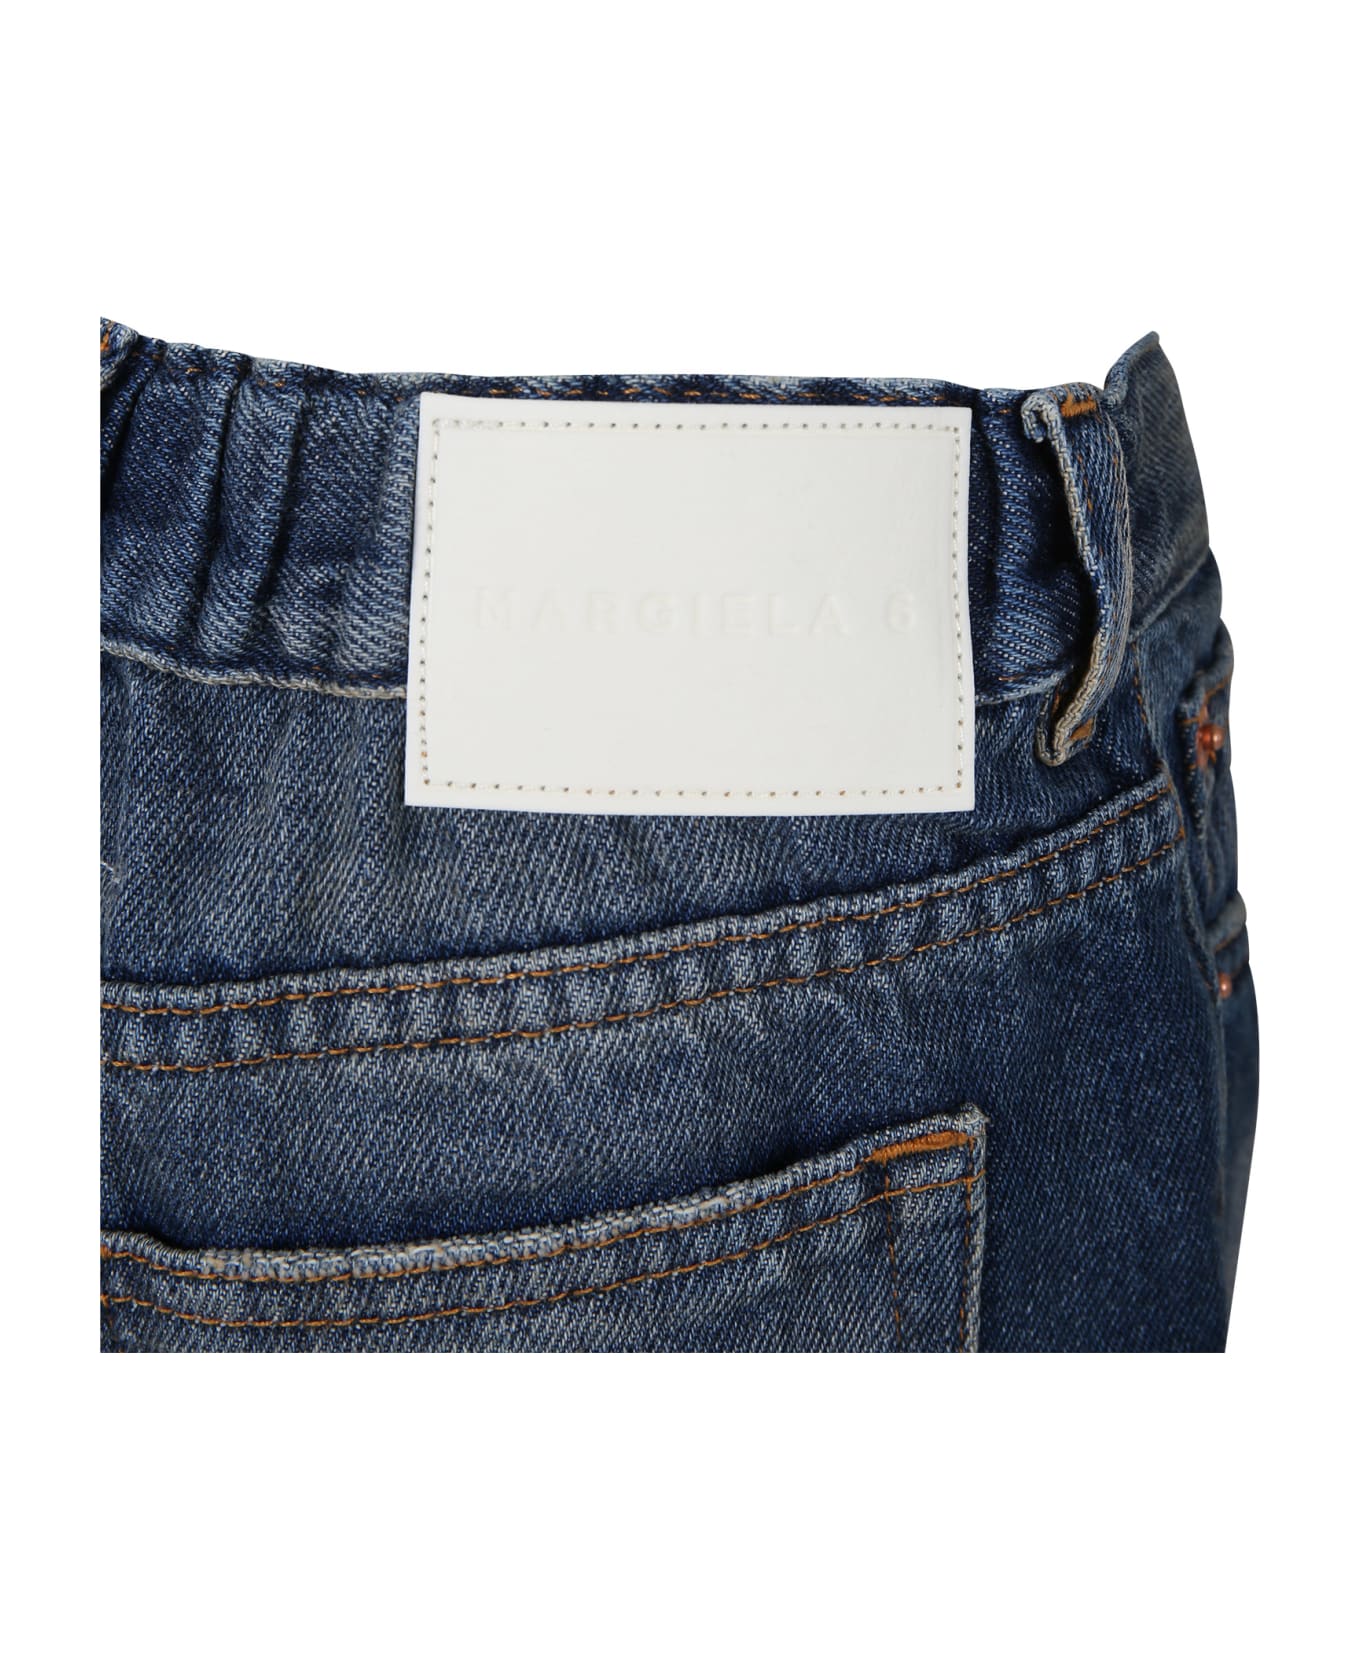 MM6 Maison Margiela Denim Jeans For Girl With Contrasting Stitching - Denim ボトムス